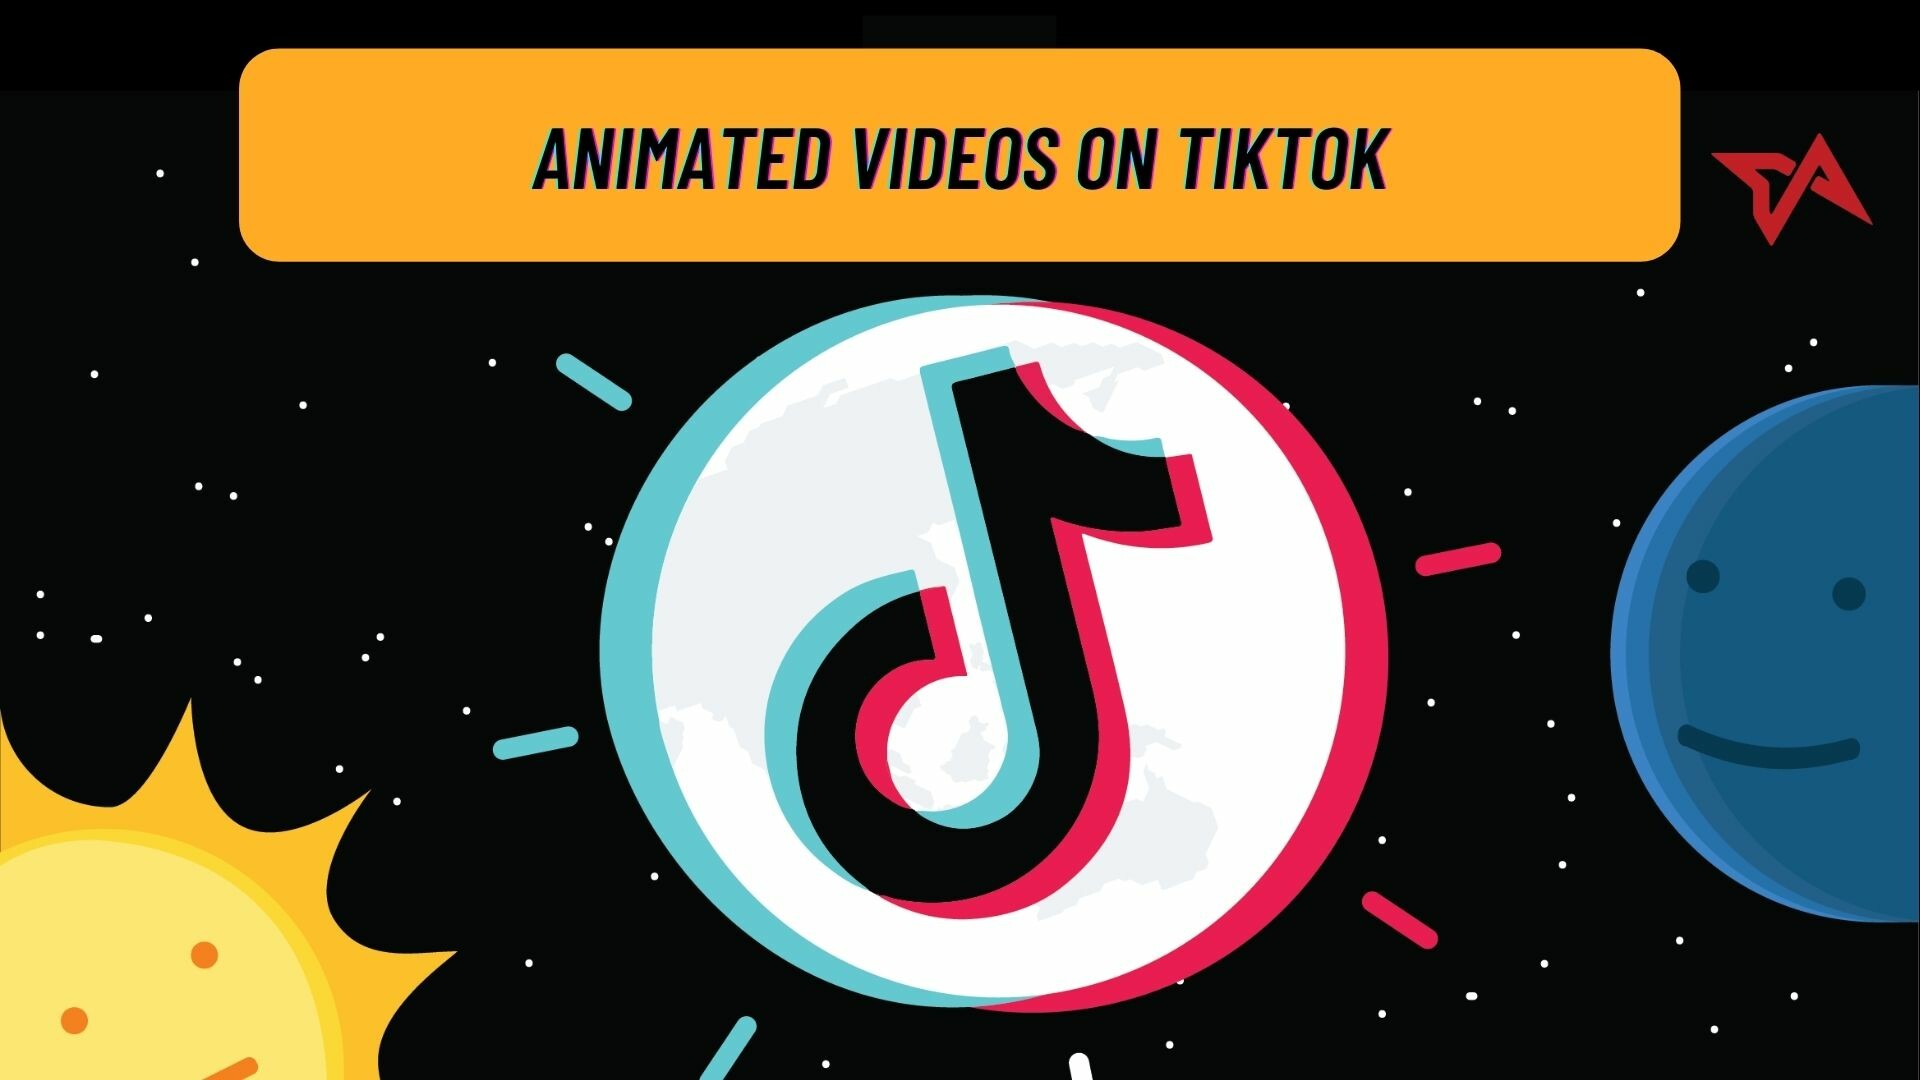 TikTok: App, Known for its viral trends, mostly related to music, Animated videos. 1920x1080 Full HD Wallpaper.